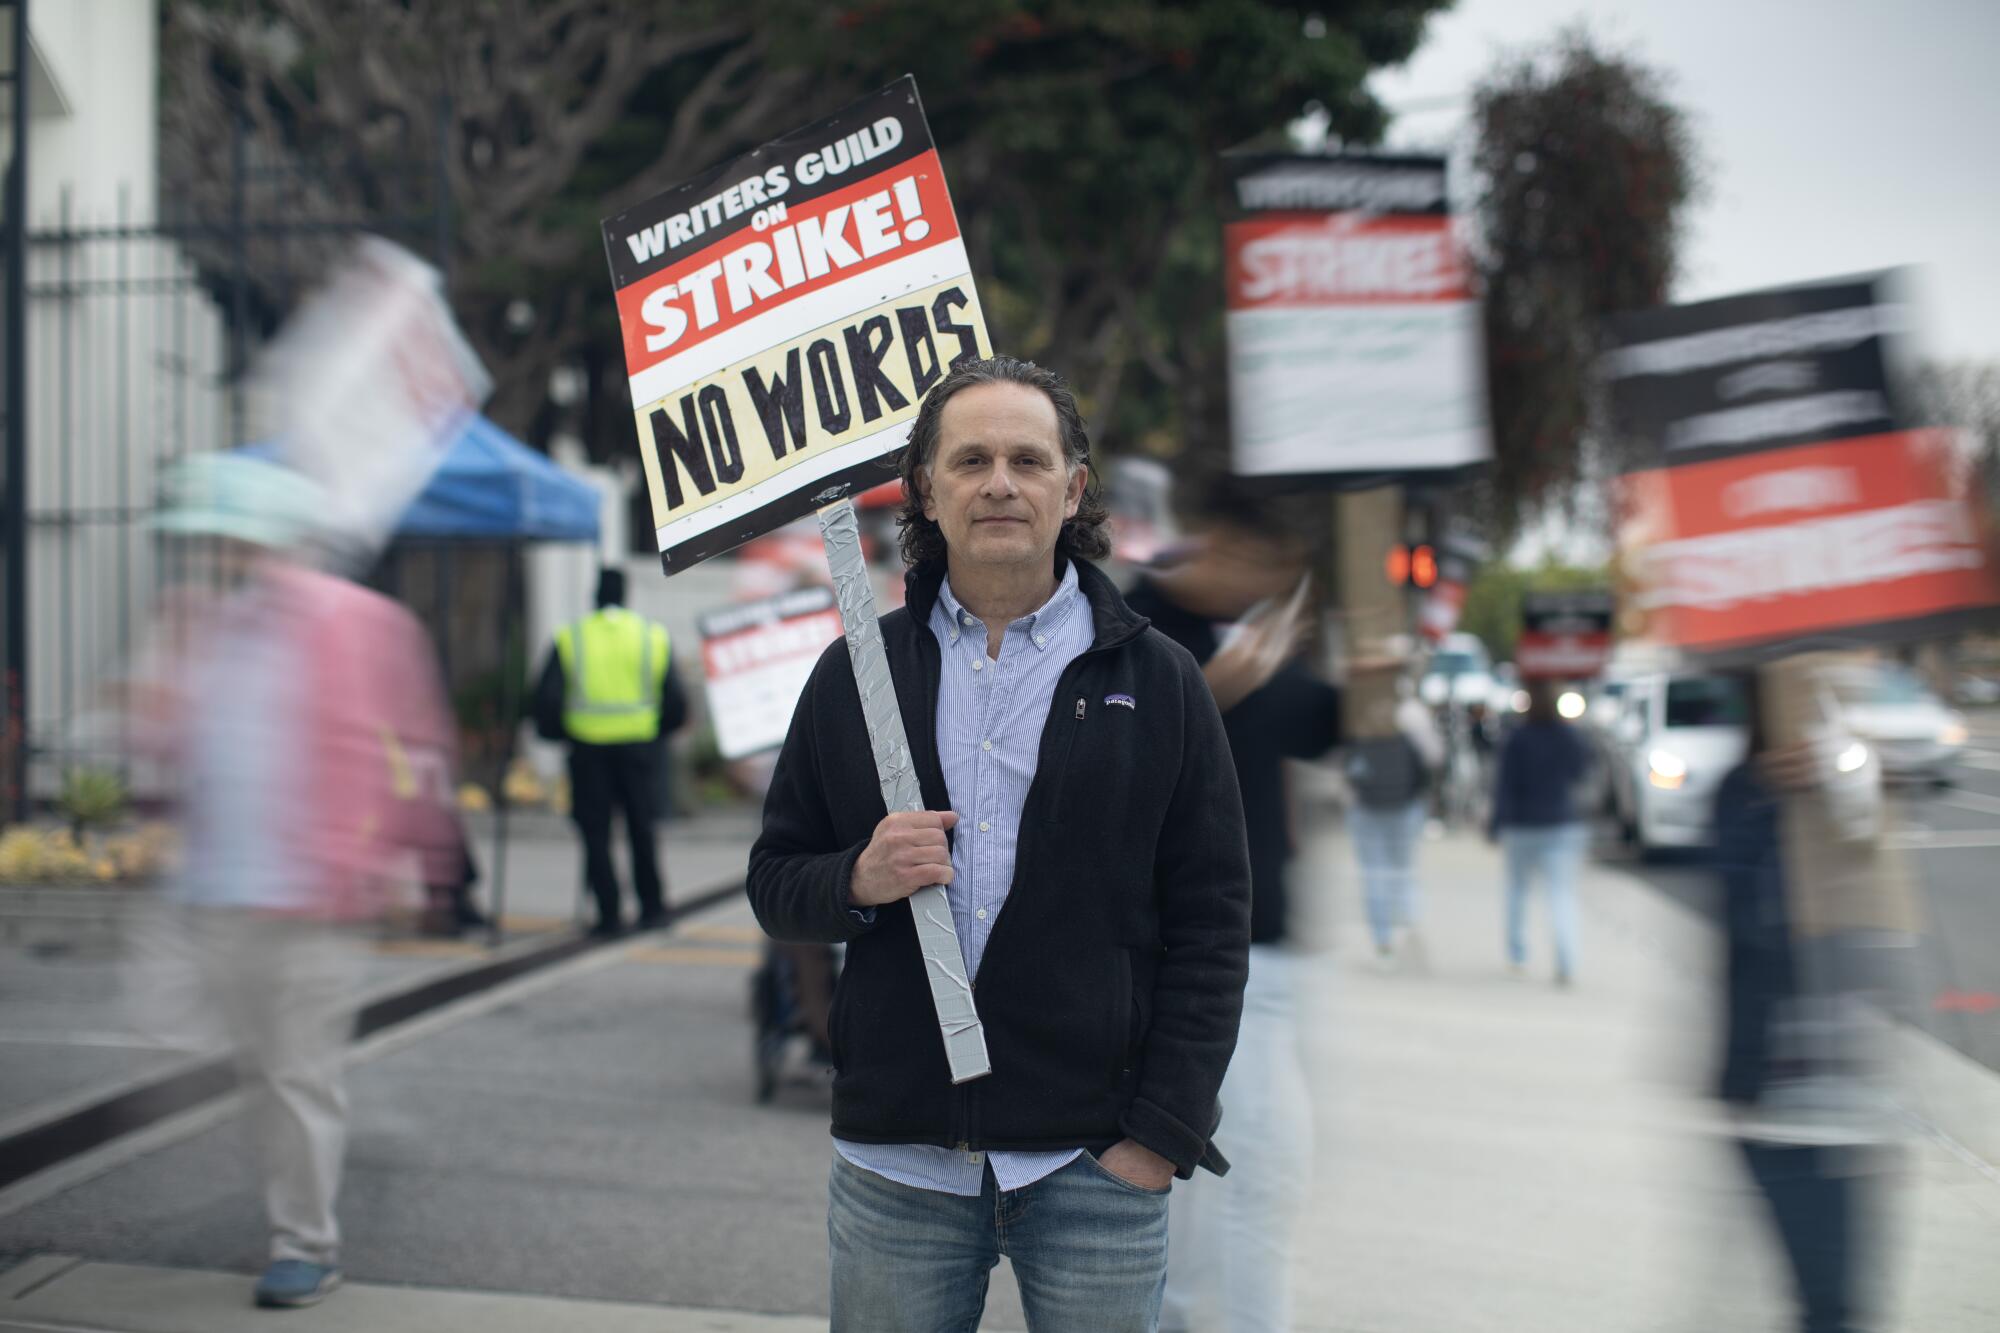 A man holds a Writers Guild strike sign reading "No Words."